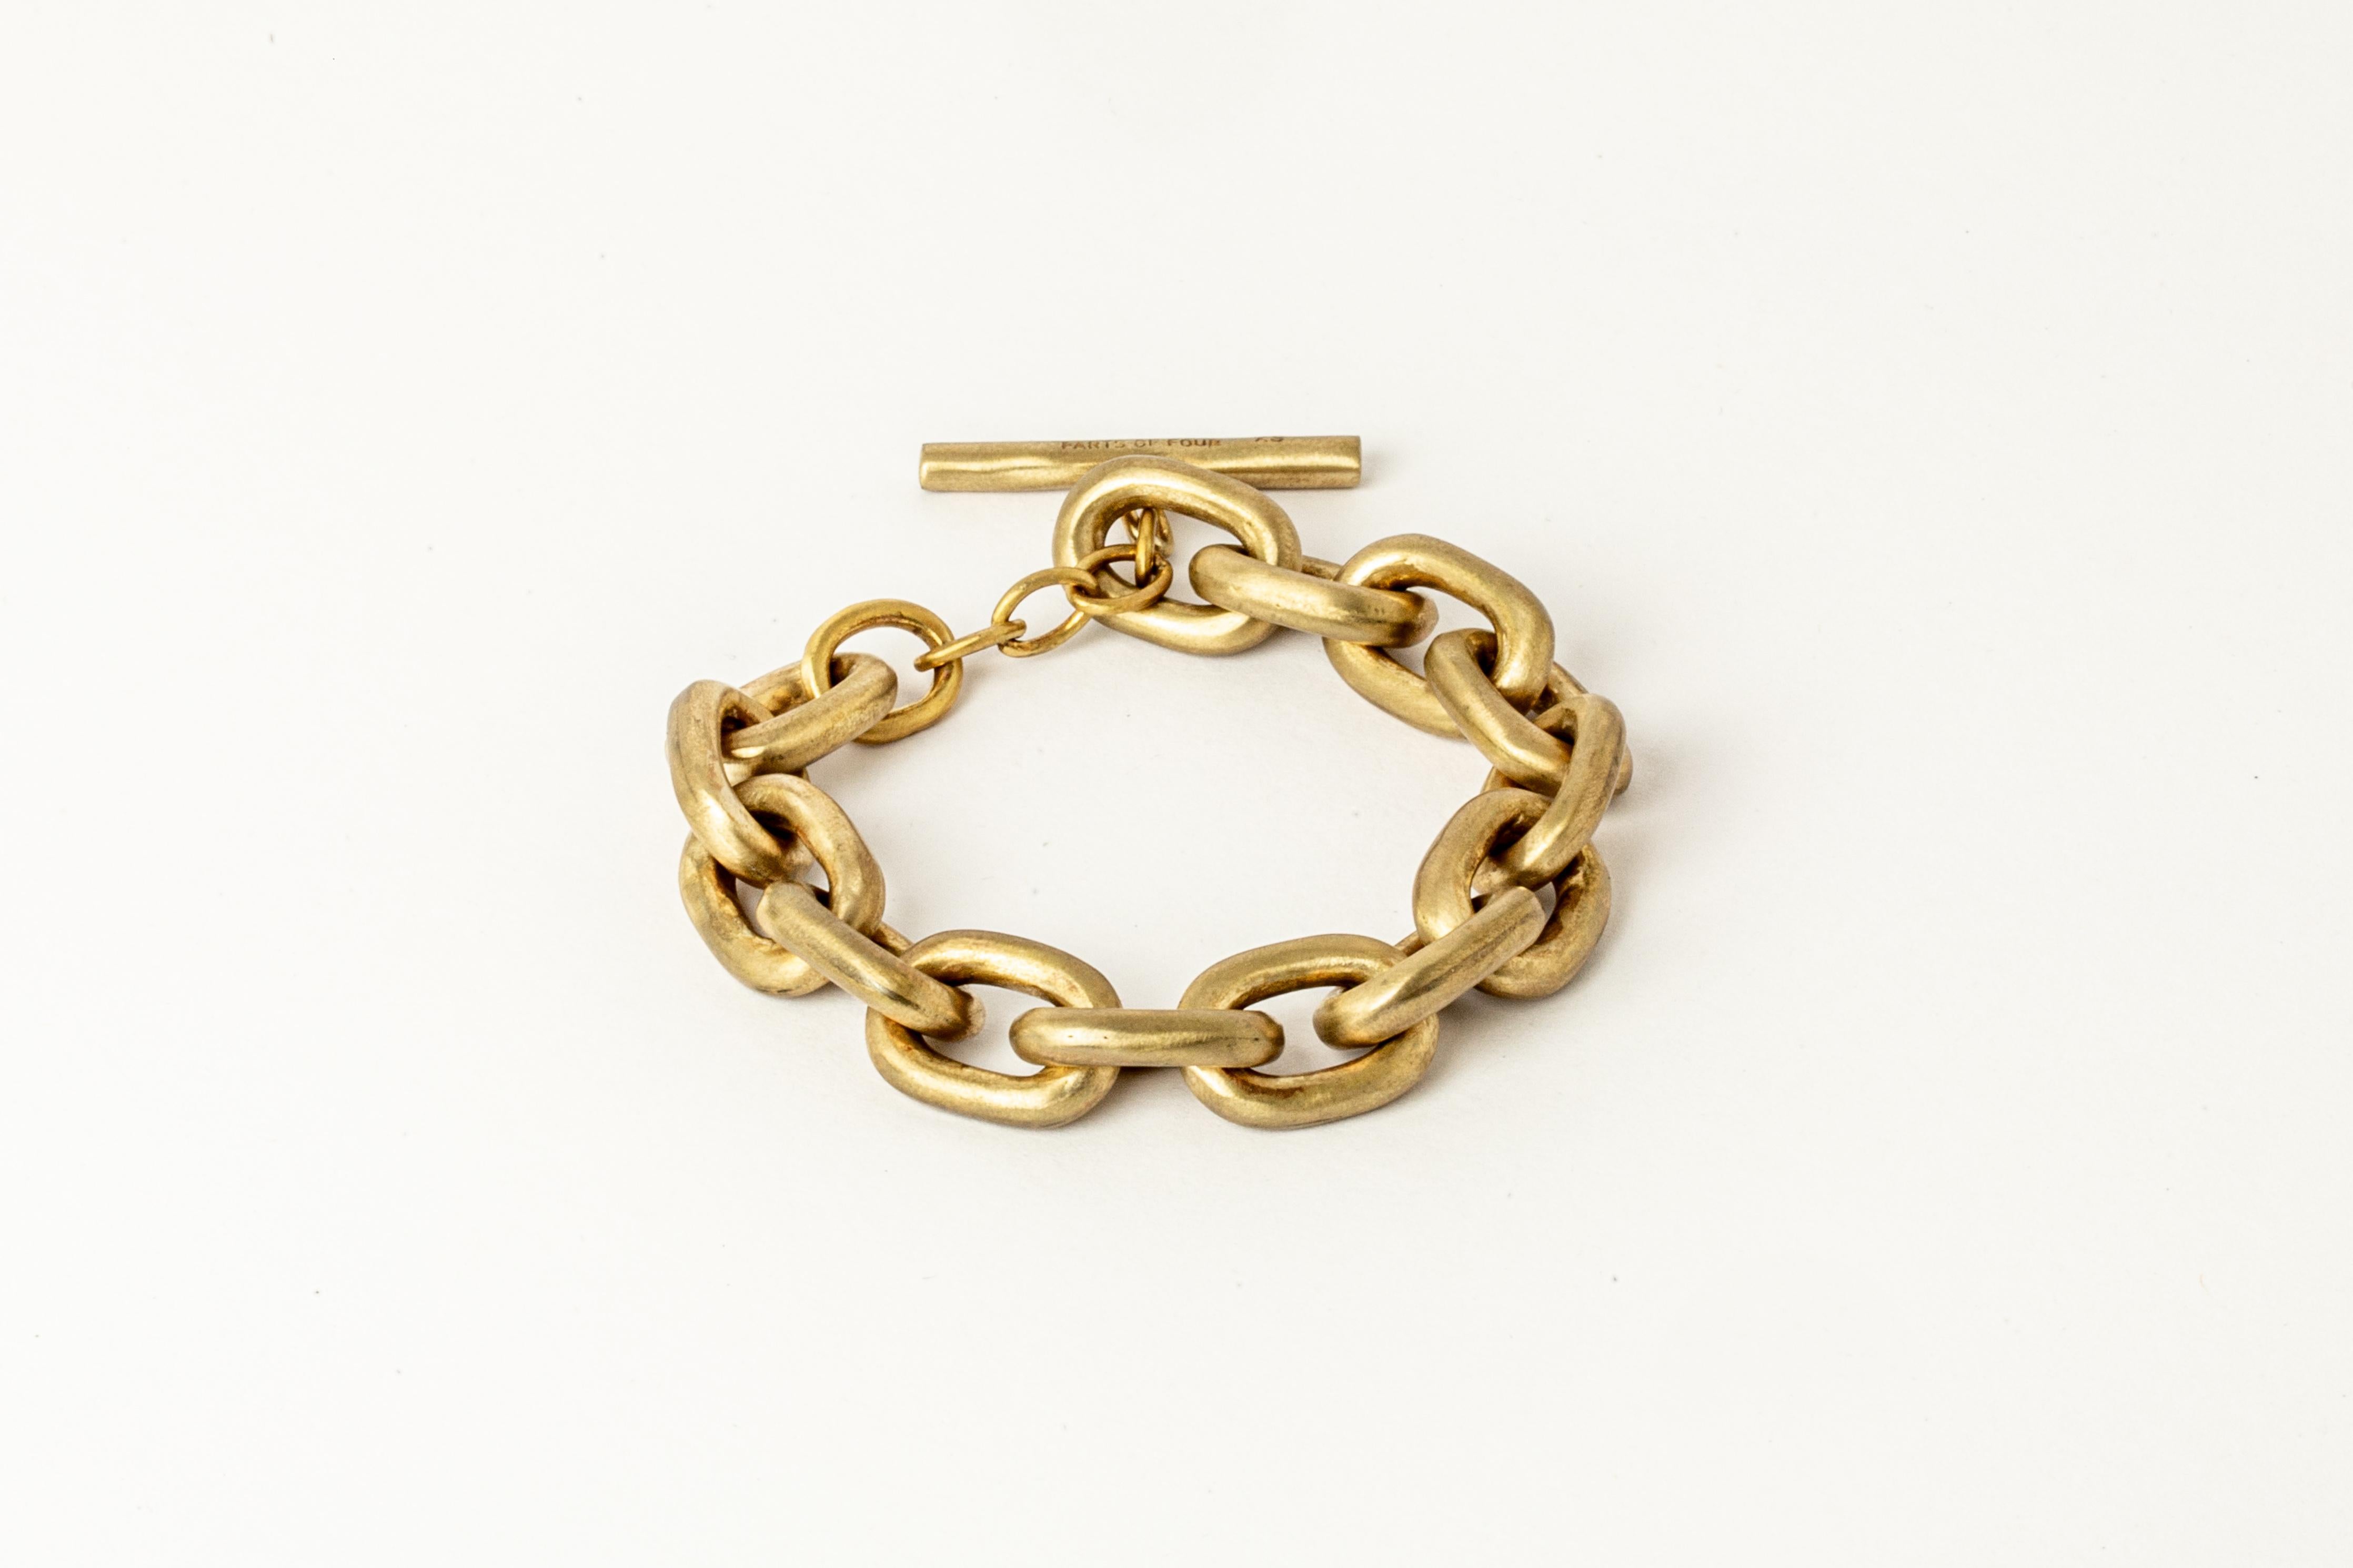 Bracelet in matte brass.
Dimensions: Chain link size (L × H): 20 mm × 14 mm
Toggle length: 30 mm